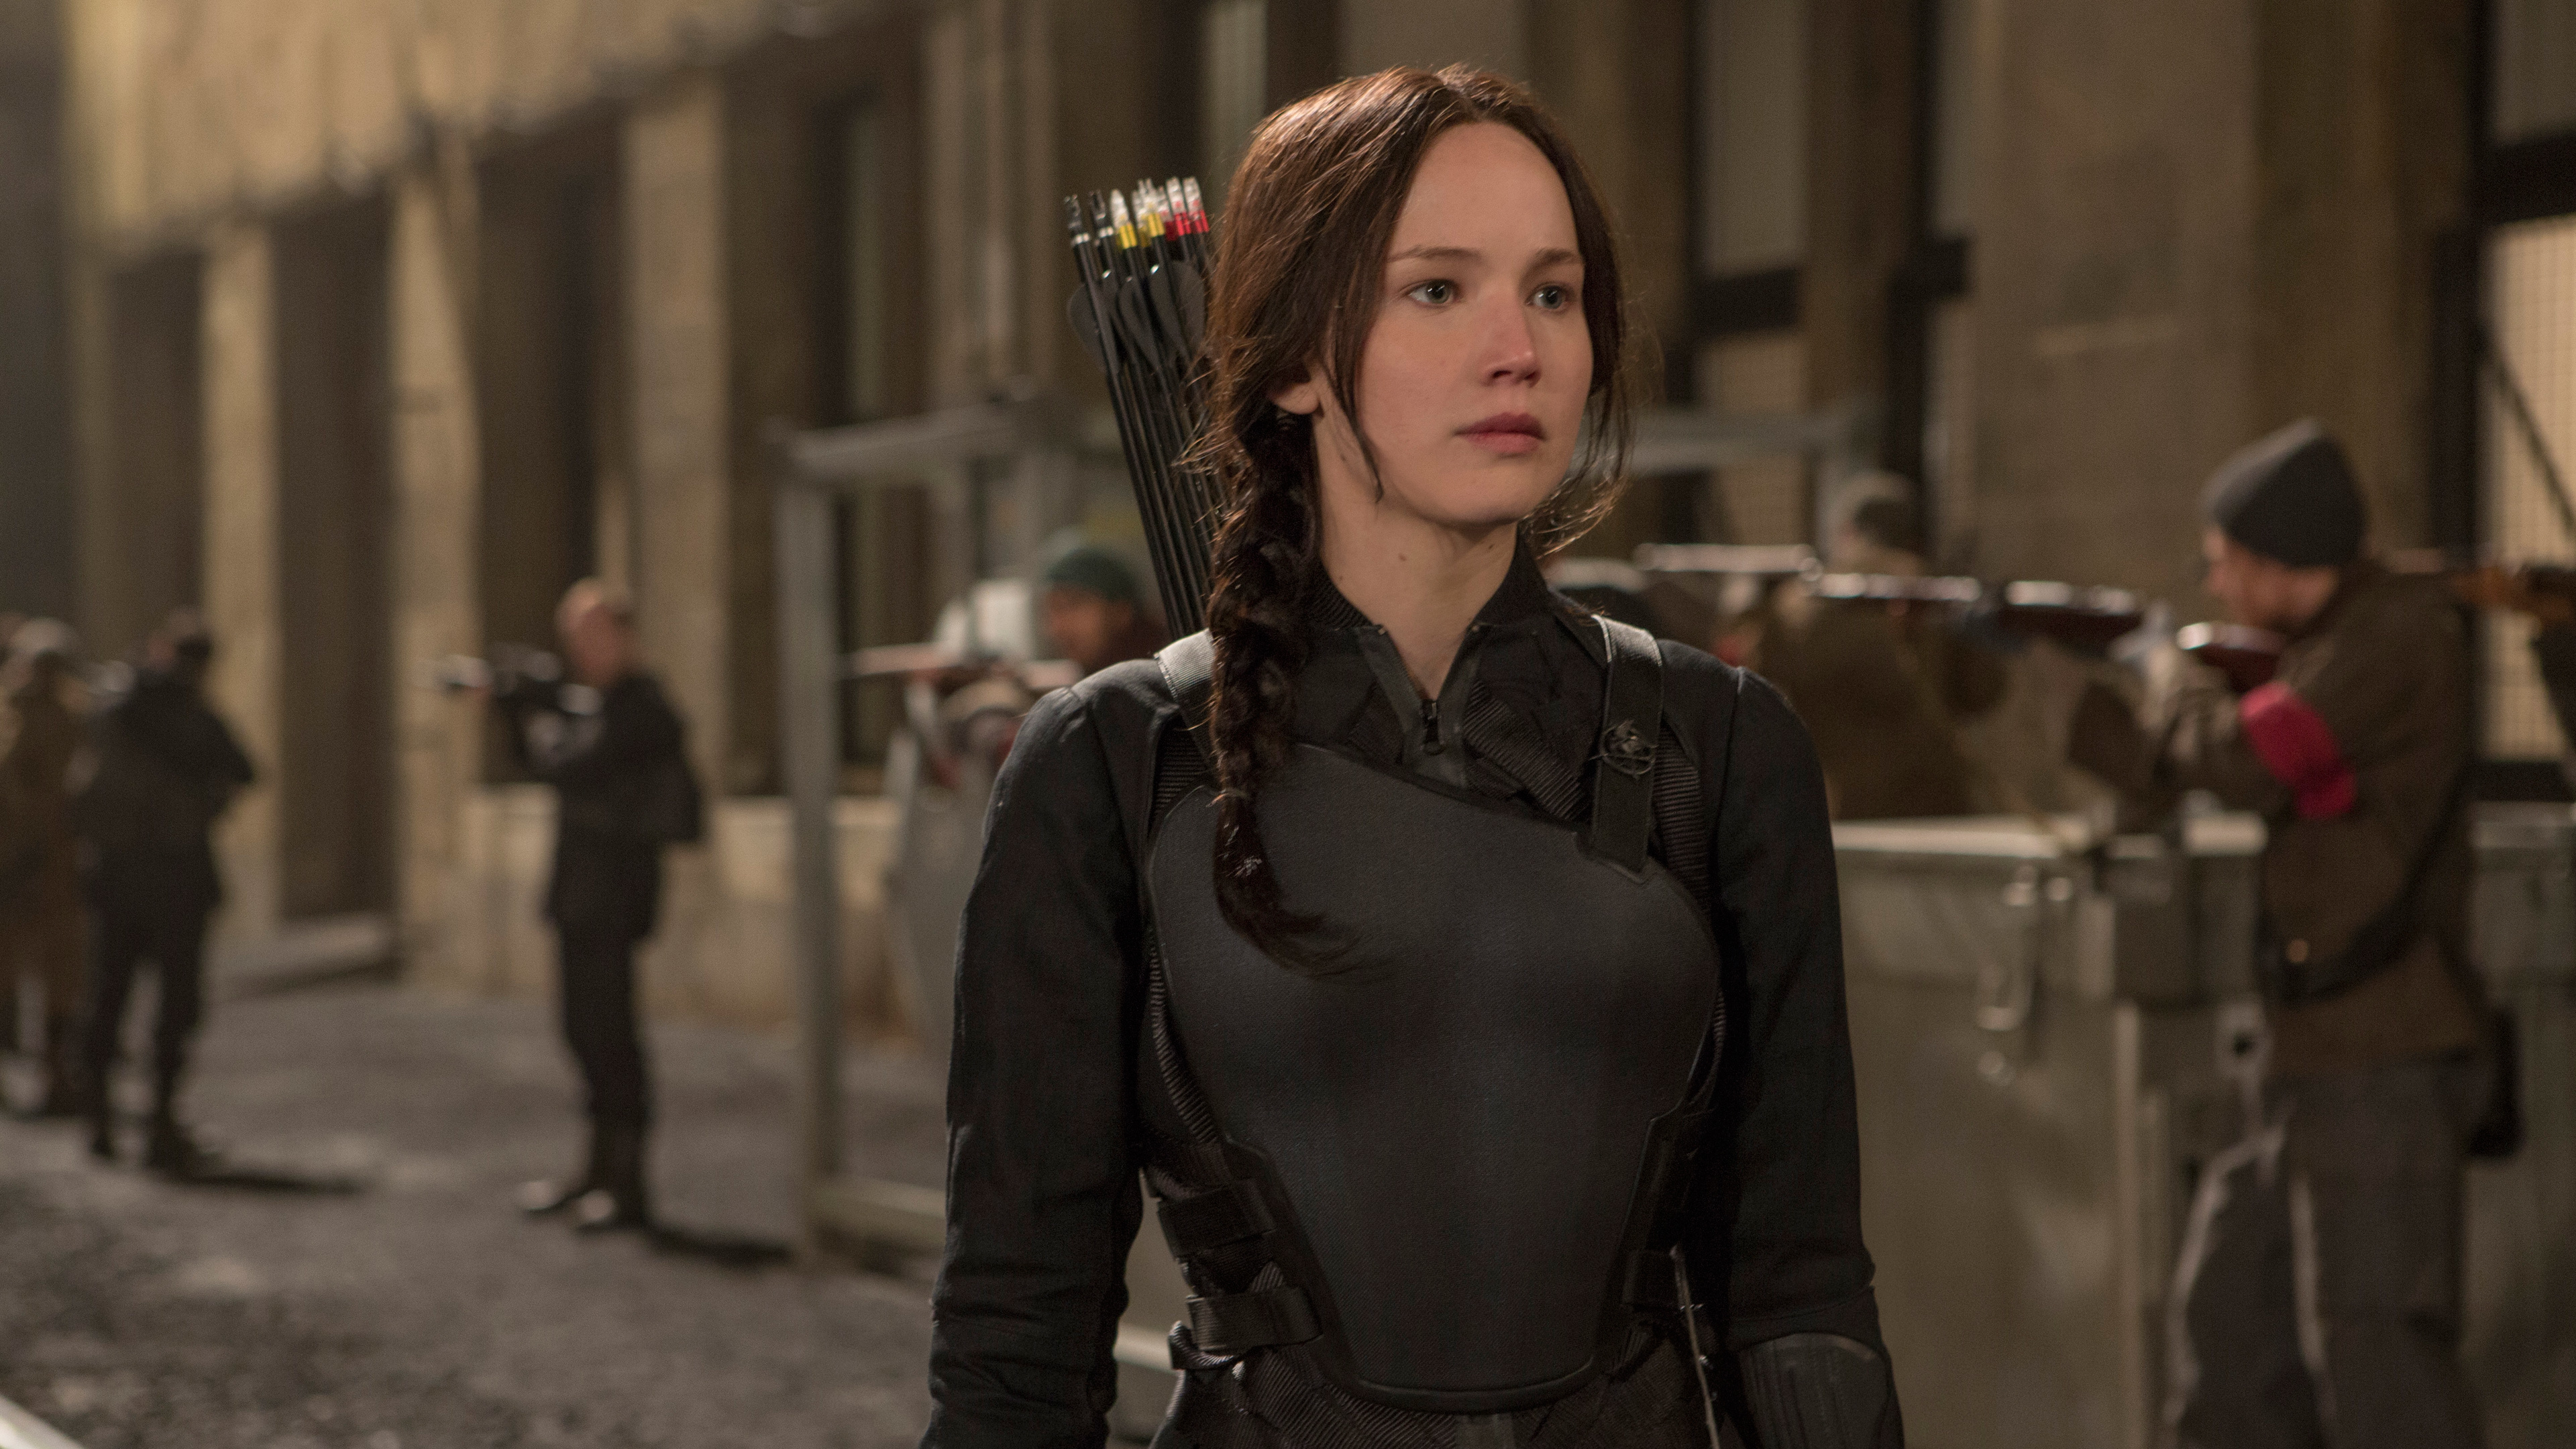 The Hunger Games: Mockingjay - Part 2 Wallpapers, Pictures, Images